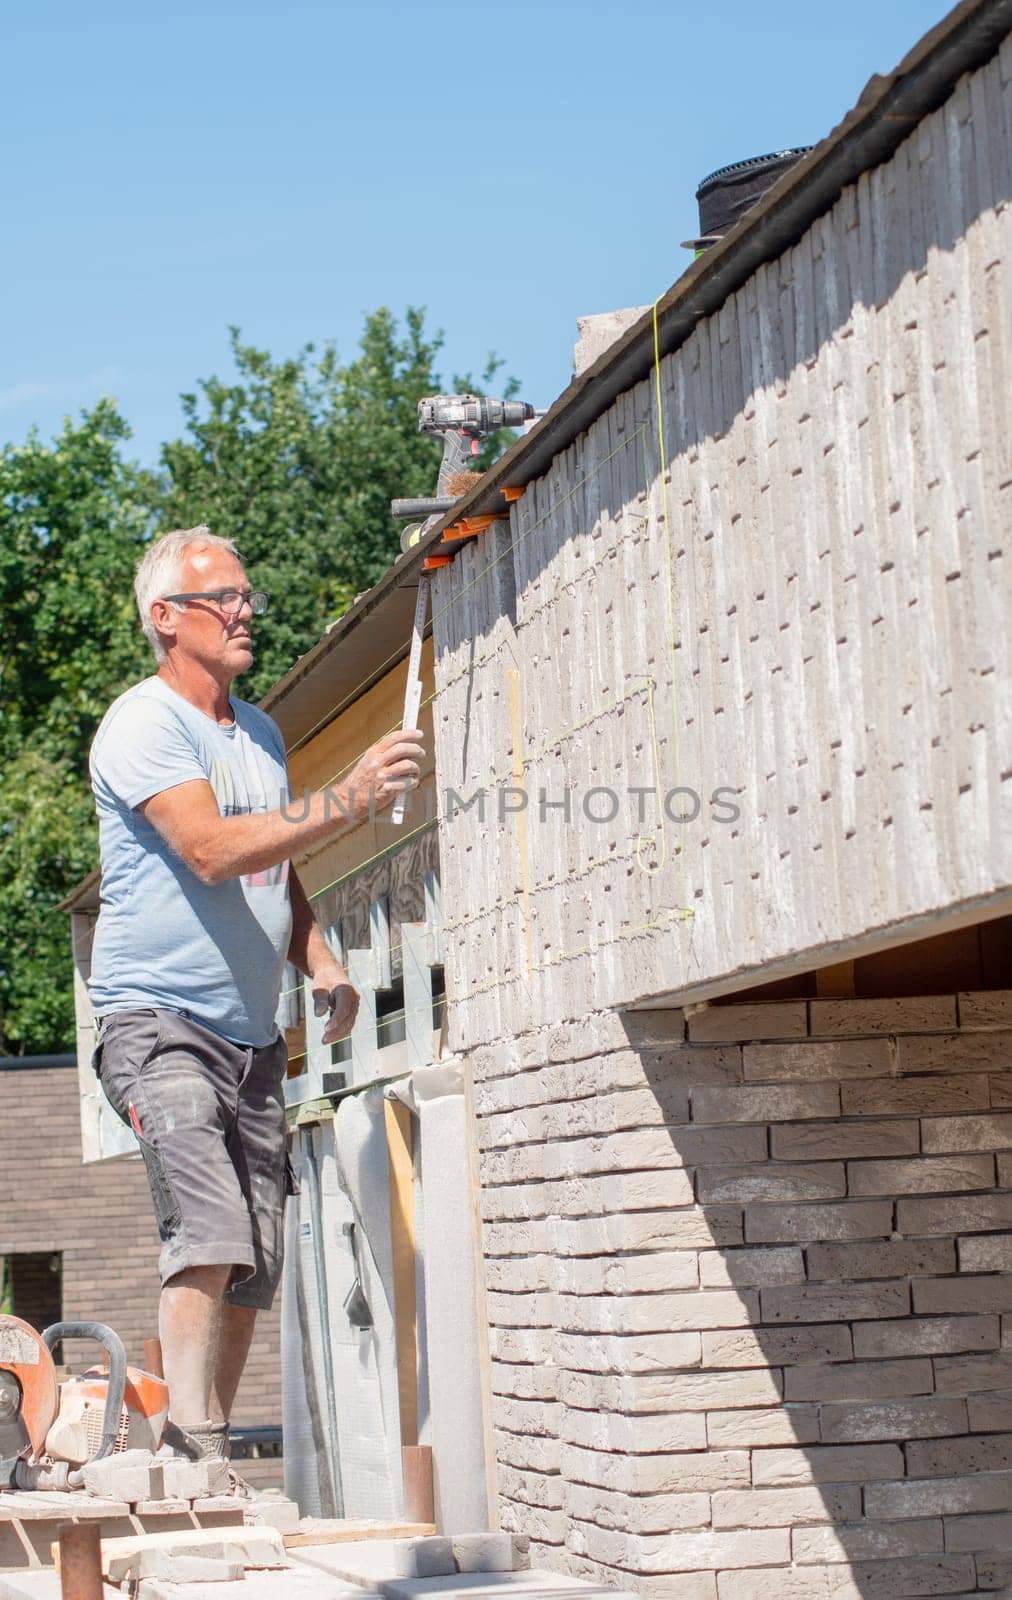 the bricklayer makes the facade of the house from gray bricks with cement and plaster at the construction site. High quality photo